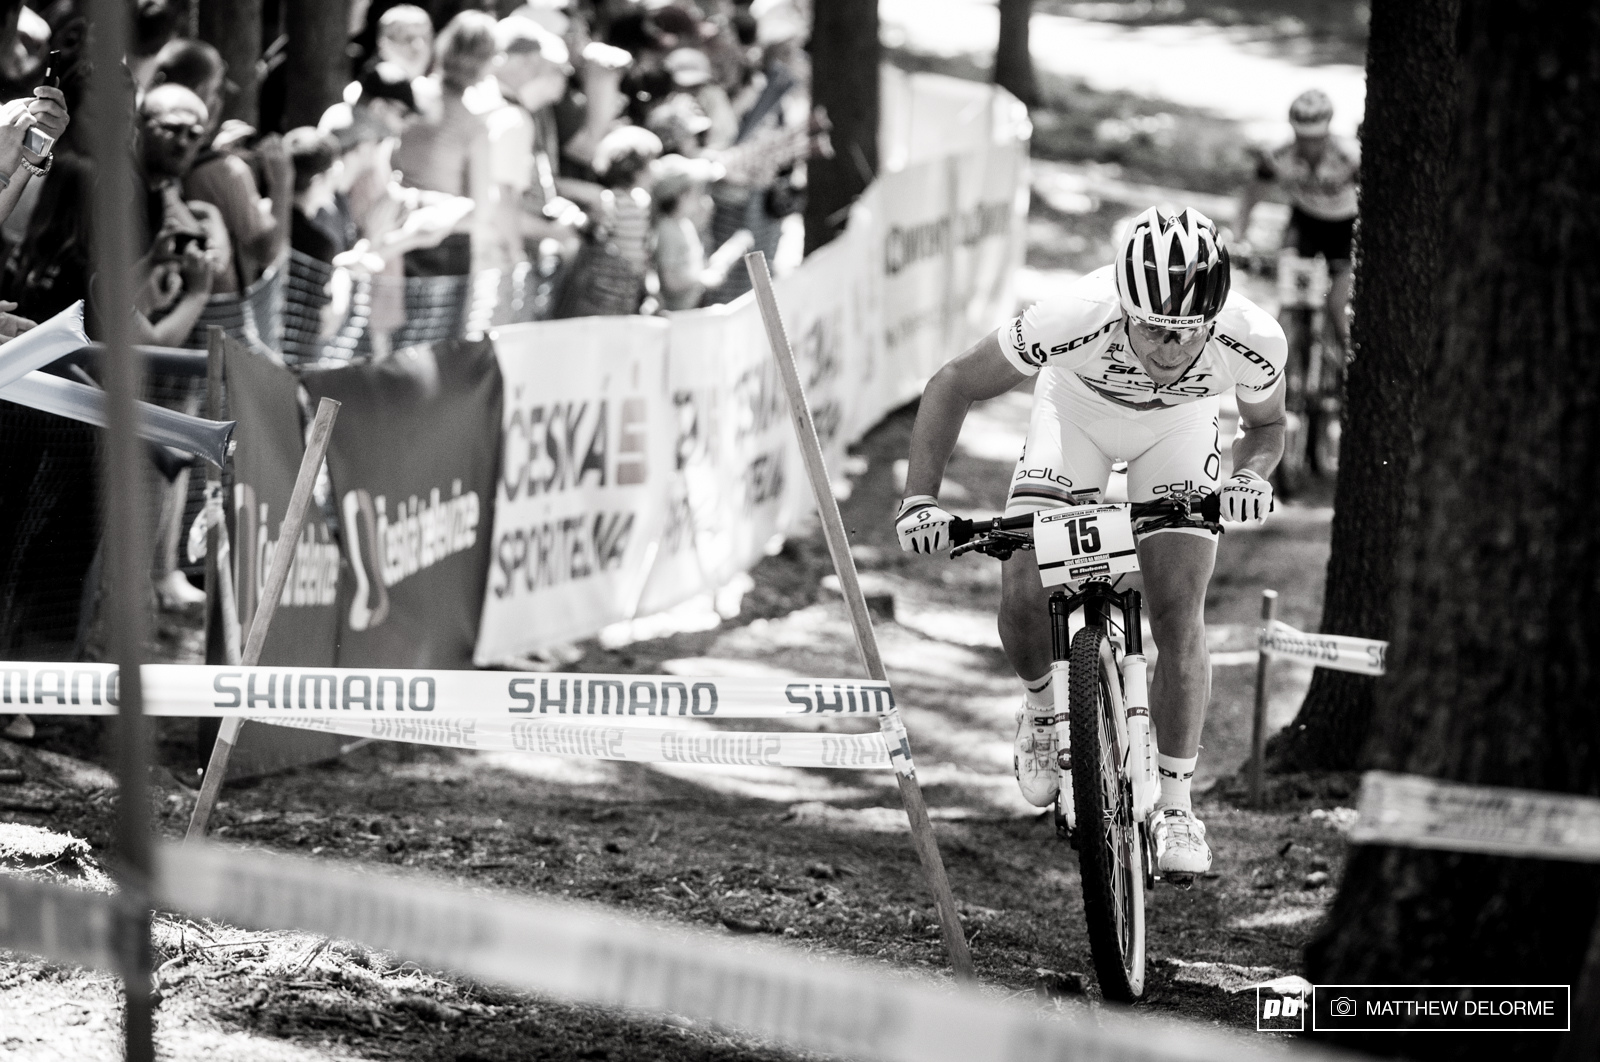 Nino Schurter started back on the second row today and quickly moved into first place during the start loop. The World Champ never looked back and took an easy win here in Nove Mesto. Looks like a time off did him some good.